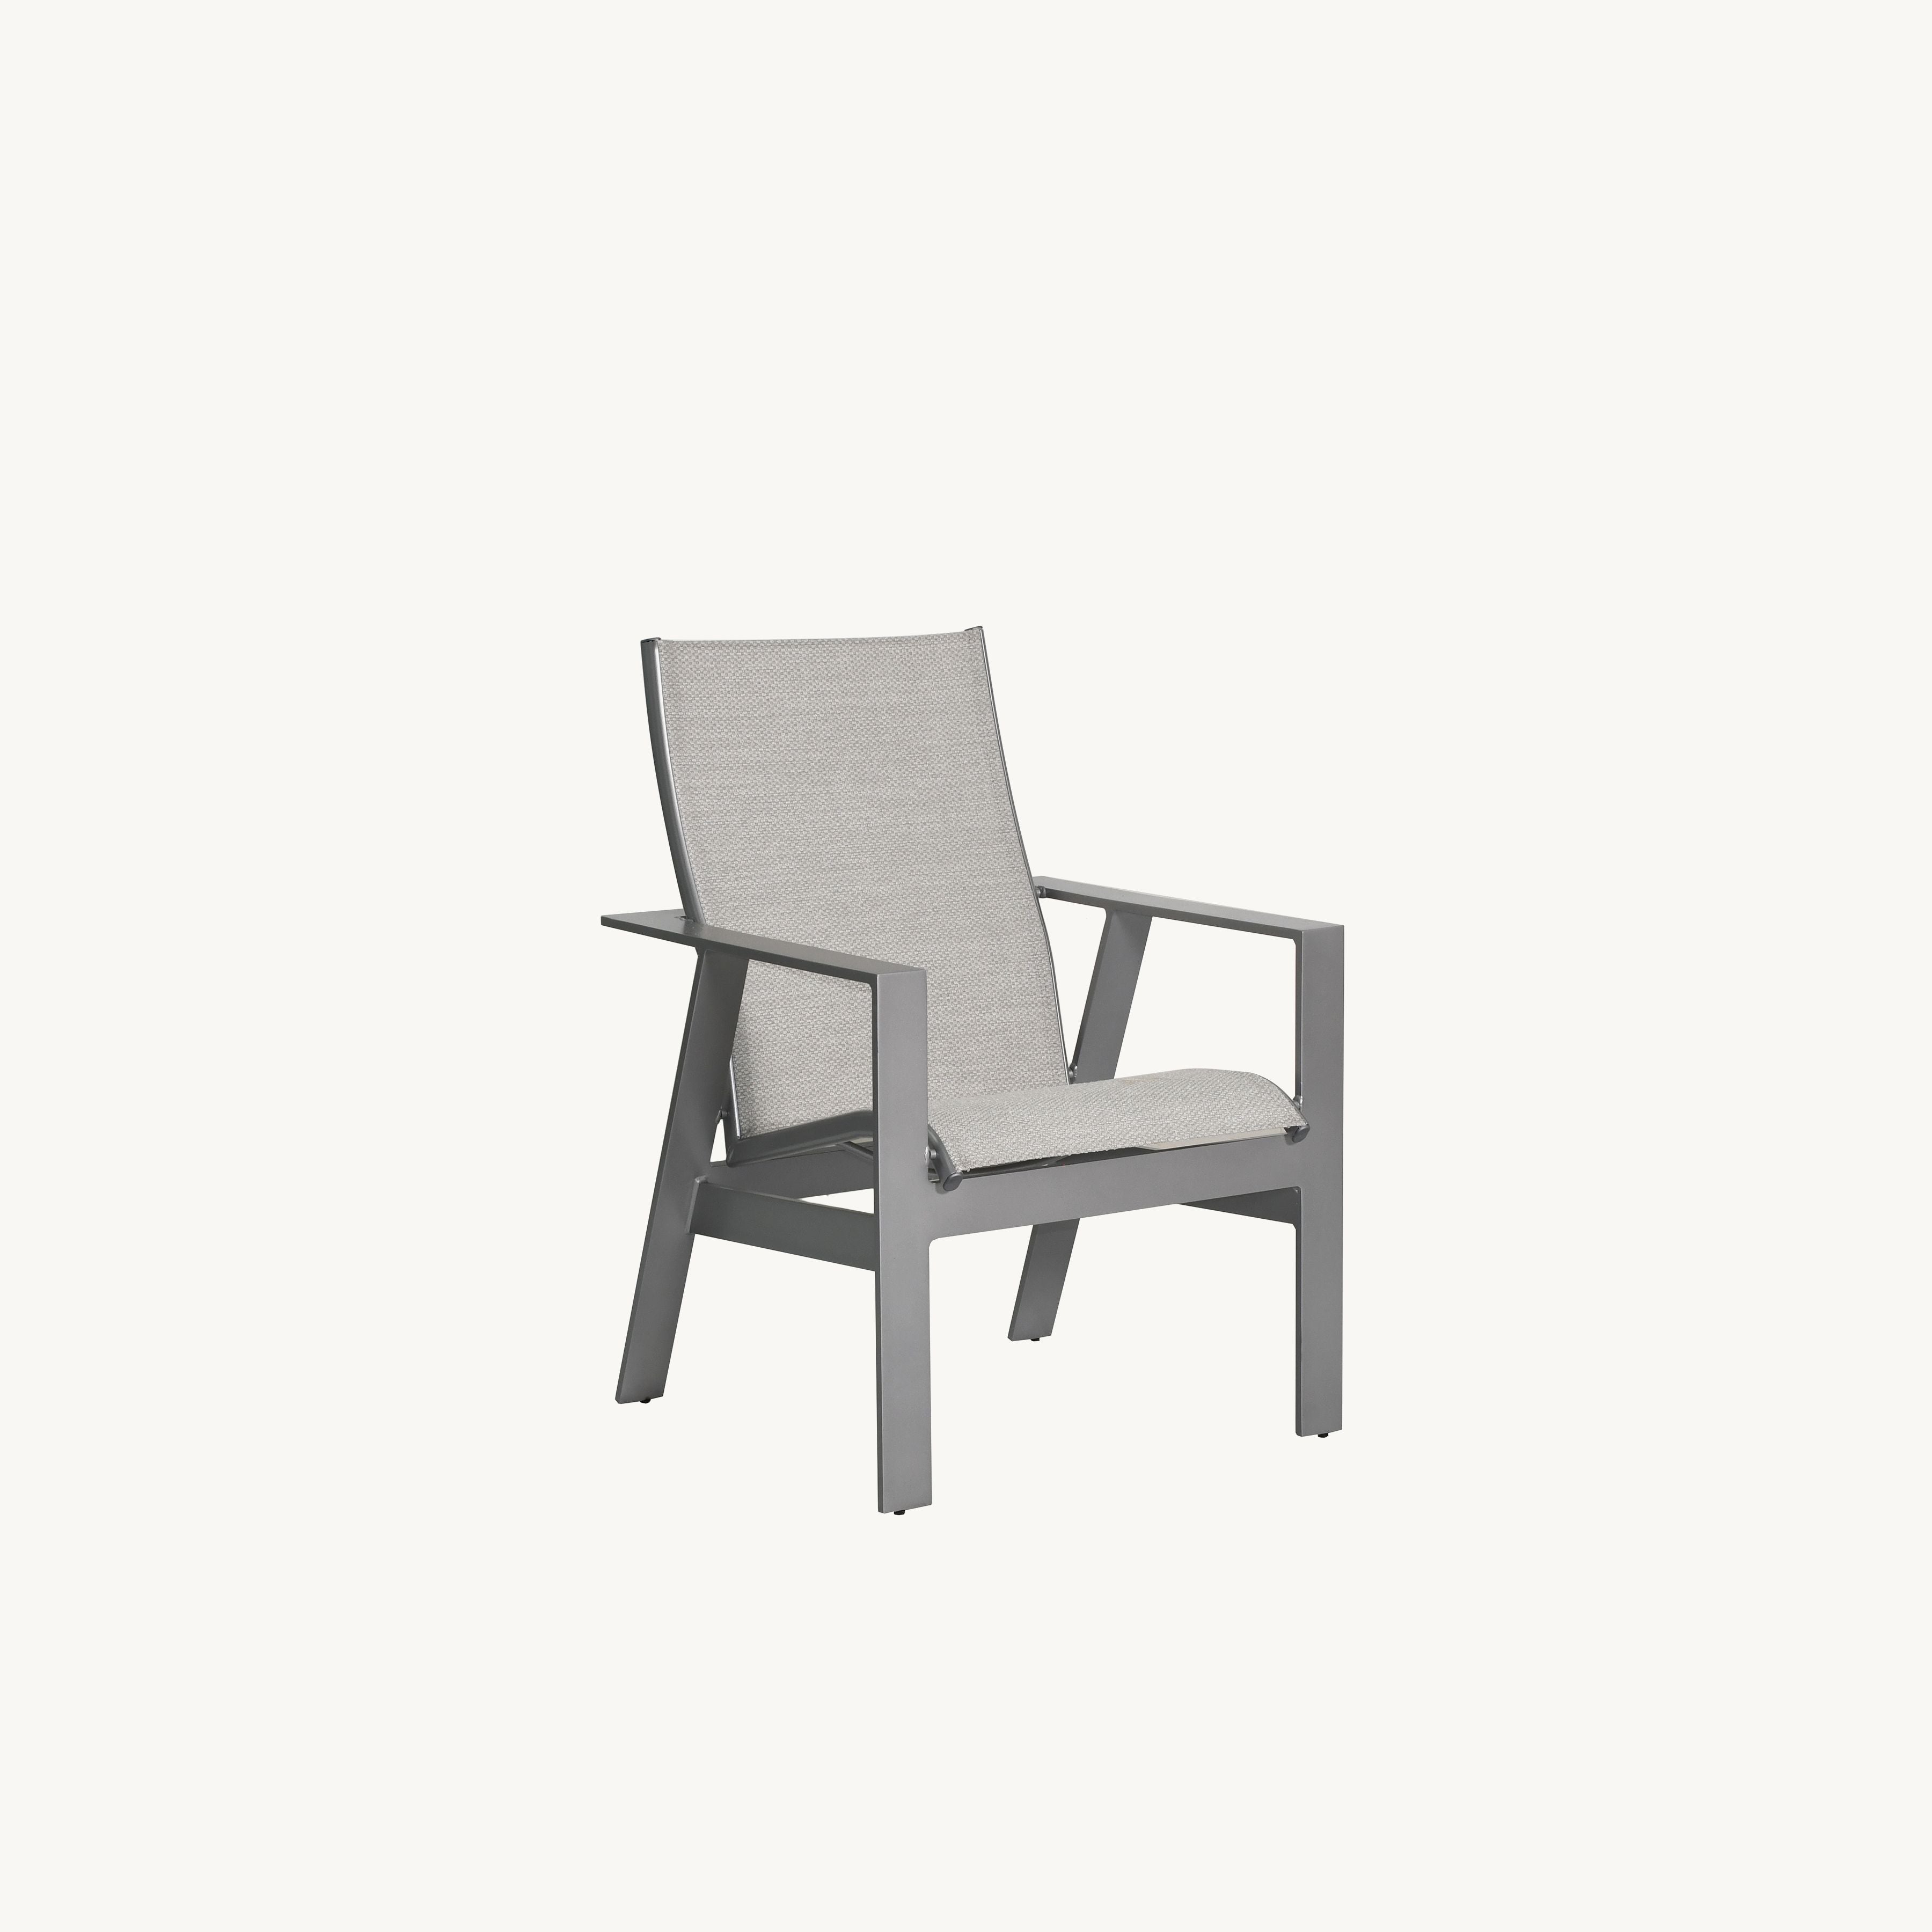 Trento Sling Dining Chair By Castelle